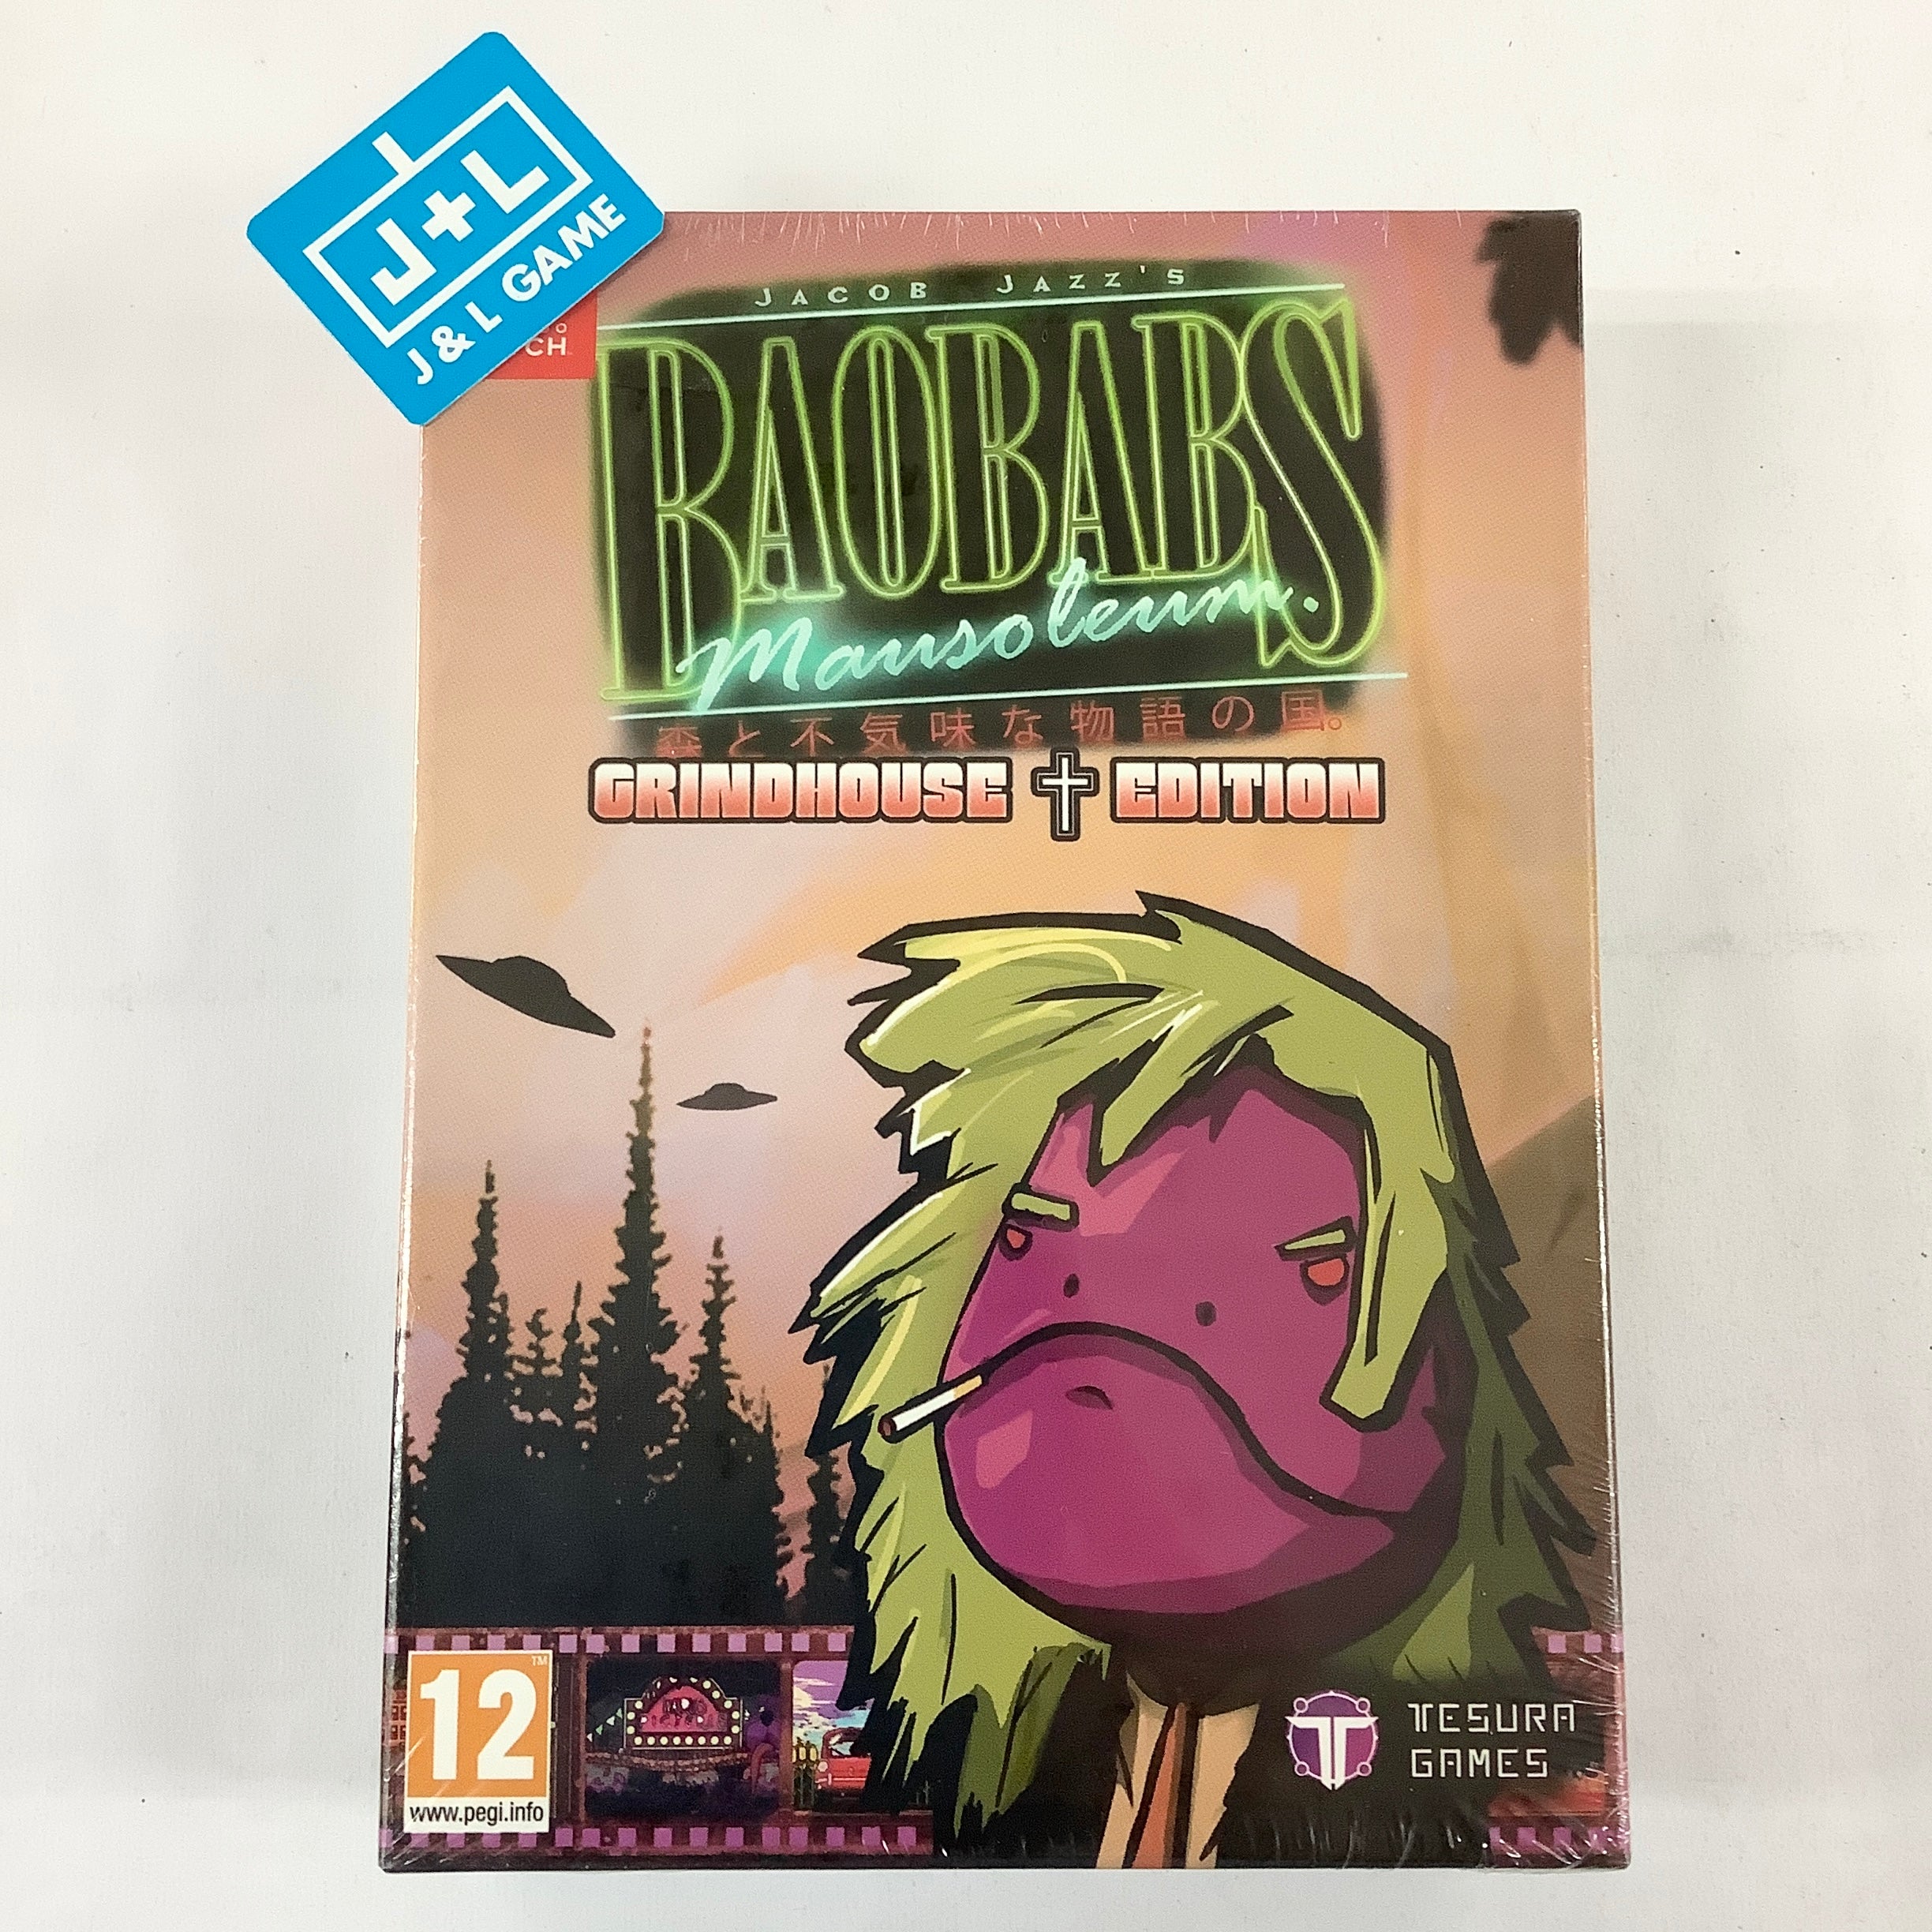 Baobabs Mausoleum Grindhouse Edition - (NSW) Nintendo Switch (European Import) Video Games Avance Discos   